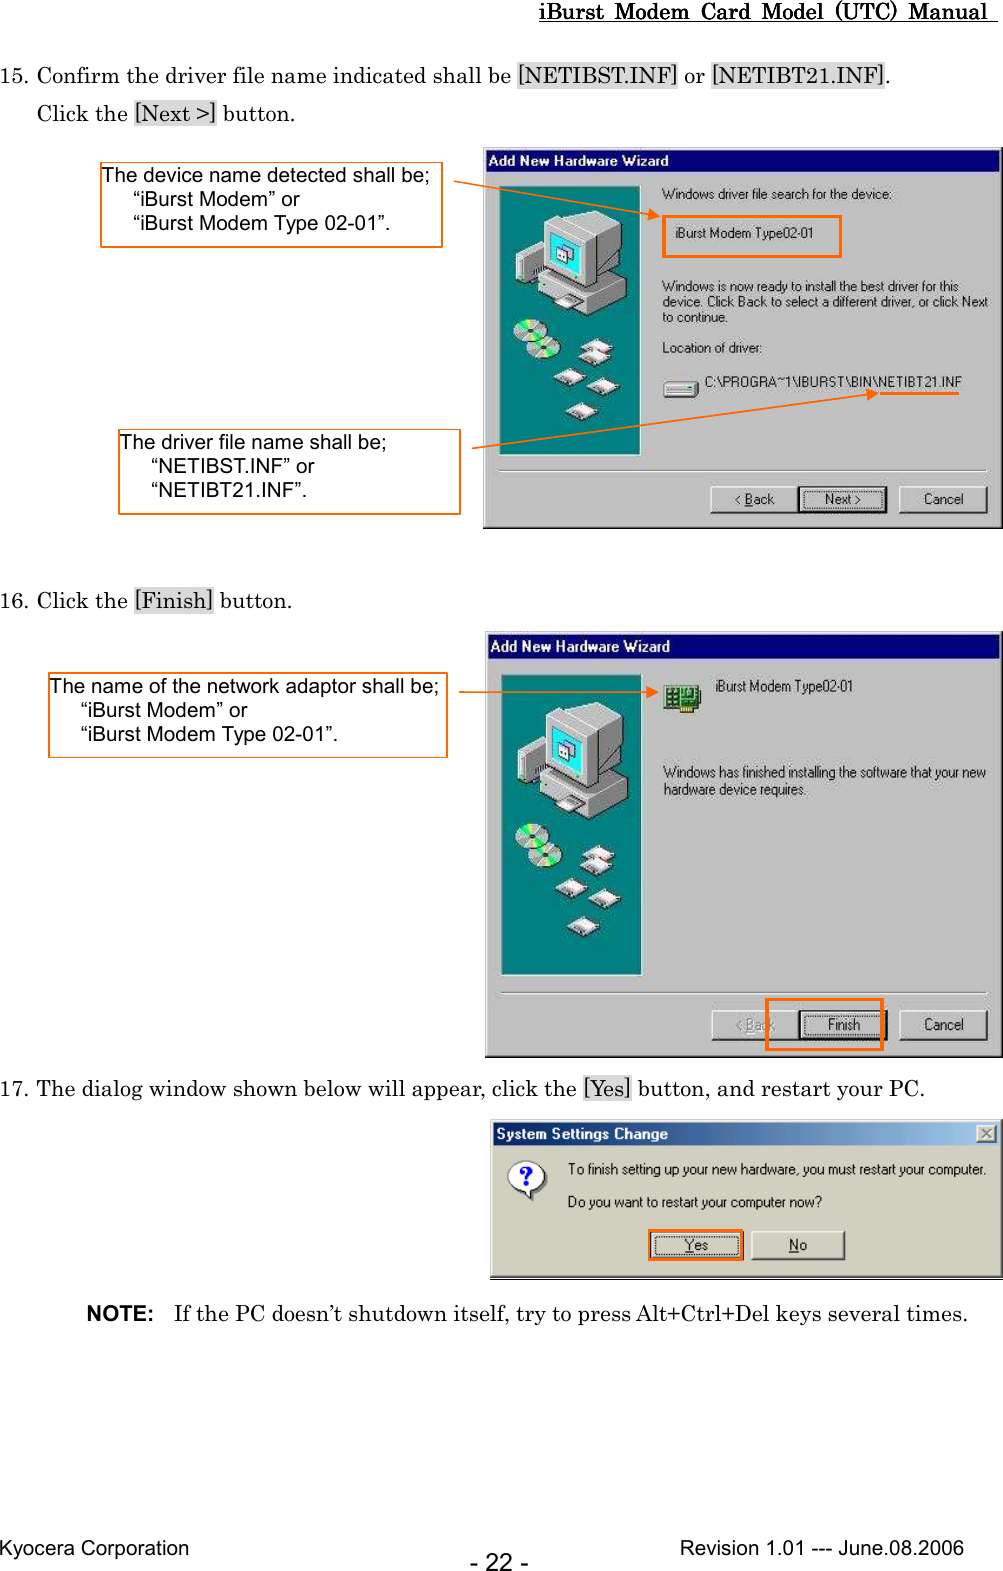 iBurst  Modem  Card  Model  (UTC)  Manual iBurst  Modem  Card  Model  (UTC)  Manual iBurst  Modem  Card  Model  (UTC)  Manual iBurst  Modem  Card  Model  (UTC)  Manual       Kyocera Corporation                                                                                              Revision 1.01 --- June.08.2006 - 22 - 15. Confirm the driver file name indicated shall be [NETIBST.INF] or [NETIBT21.INF]. Click the [Next &gt;] button.   16. Click the [Finish] button.  17. The dialog window shown below will appear, click the [Yes] button, and restart your PC.  NOTE:  If the PC doesn’t shutdown itself, try to press Alt+Ctrl+Del keys several times.  The device name detected shall be;     “iBurst Modem” or     “iBurst Modem Type 02-01”. The driver file name shall be;     “NETIBST.INF” or     “NETIBT21.INF”. The name of the network adaptor shall be;     “iBurst Modem” or     “iBurst Modem Type 02-01”. 